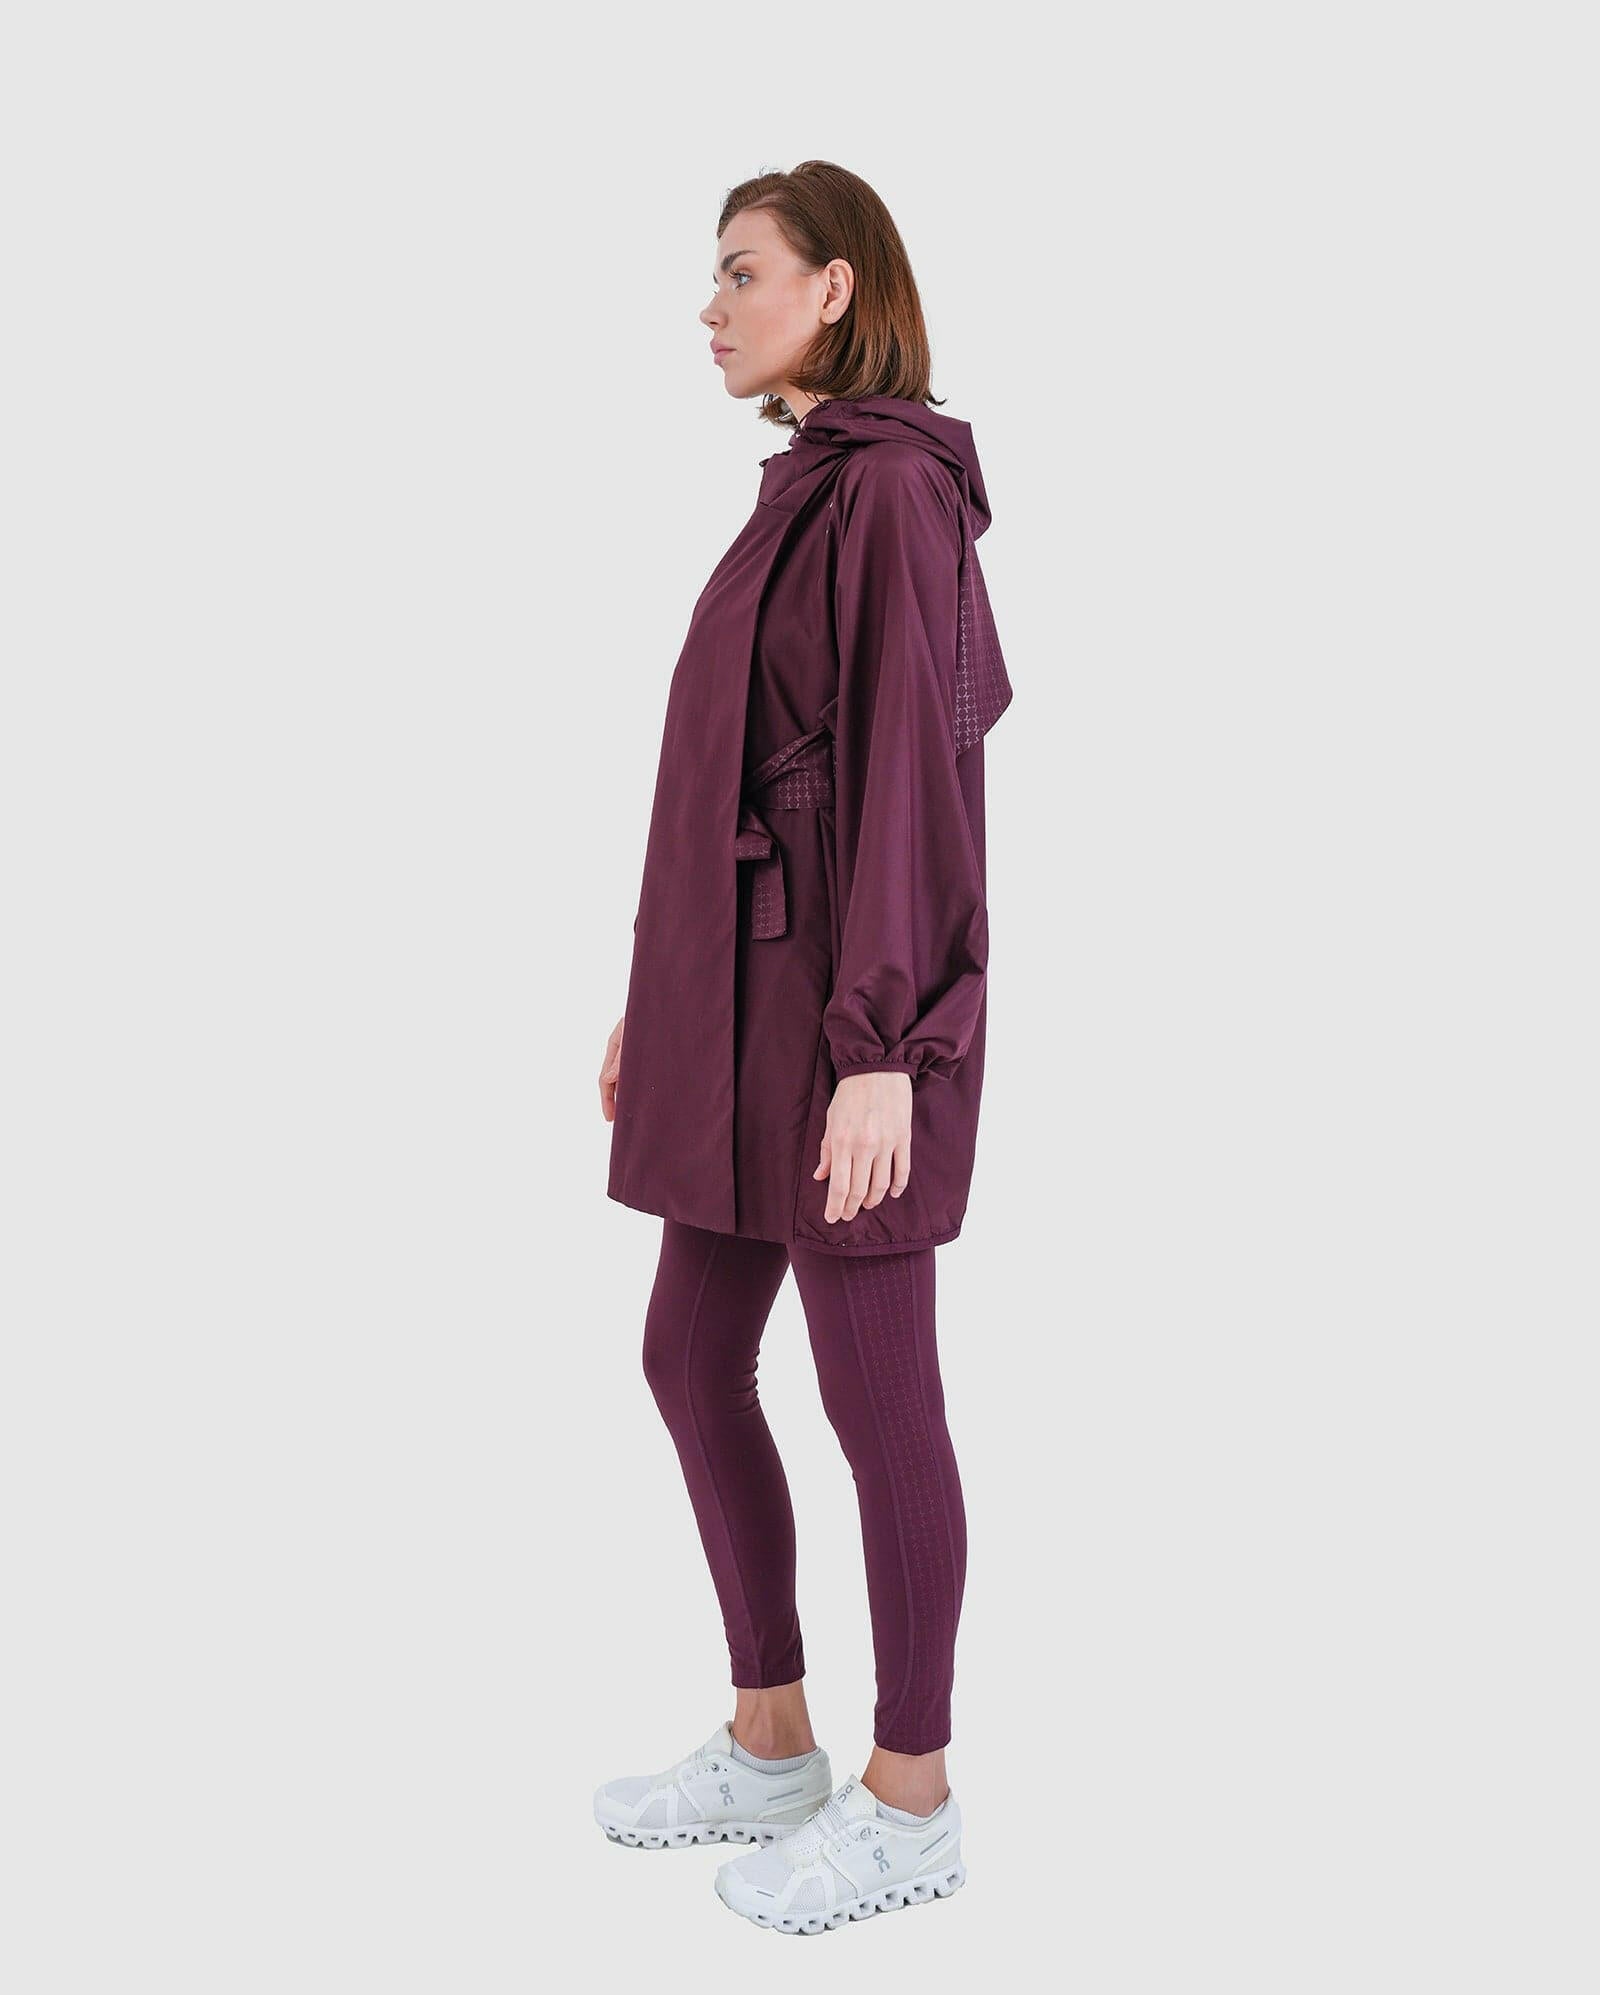 Side view of a woman wearing a maroon oversized cooldown coat by Qynda paired with matching leggings and white sneakers, posing against a neutral background.